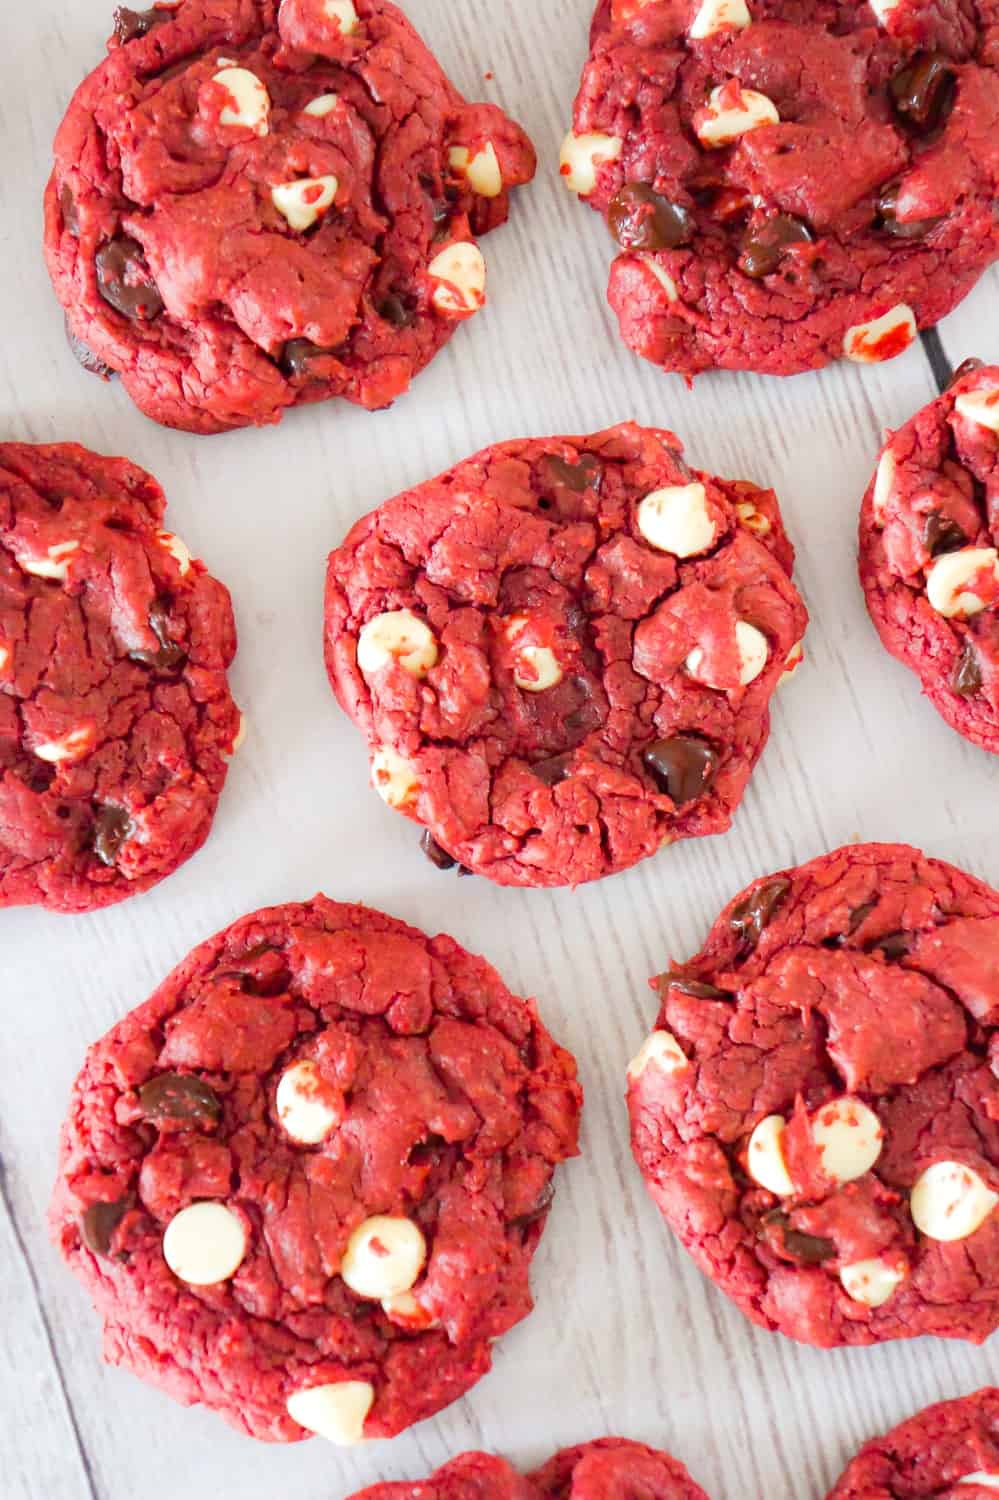 Red Velvet Cake Mix Cookies are an easy dessert recipe perfect for Valentine's day. These chewy red velvet cookies are loaded with semi-sweet and white chocolate chips.